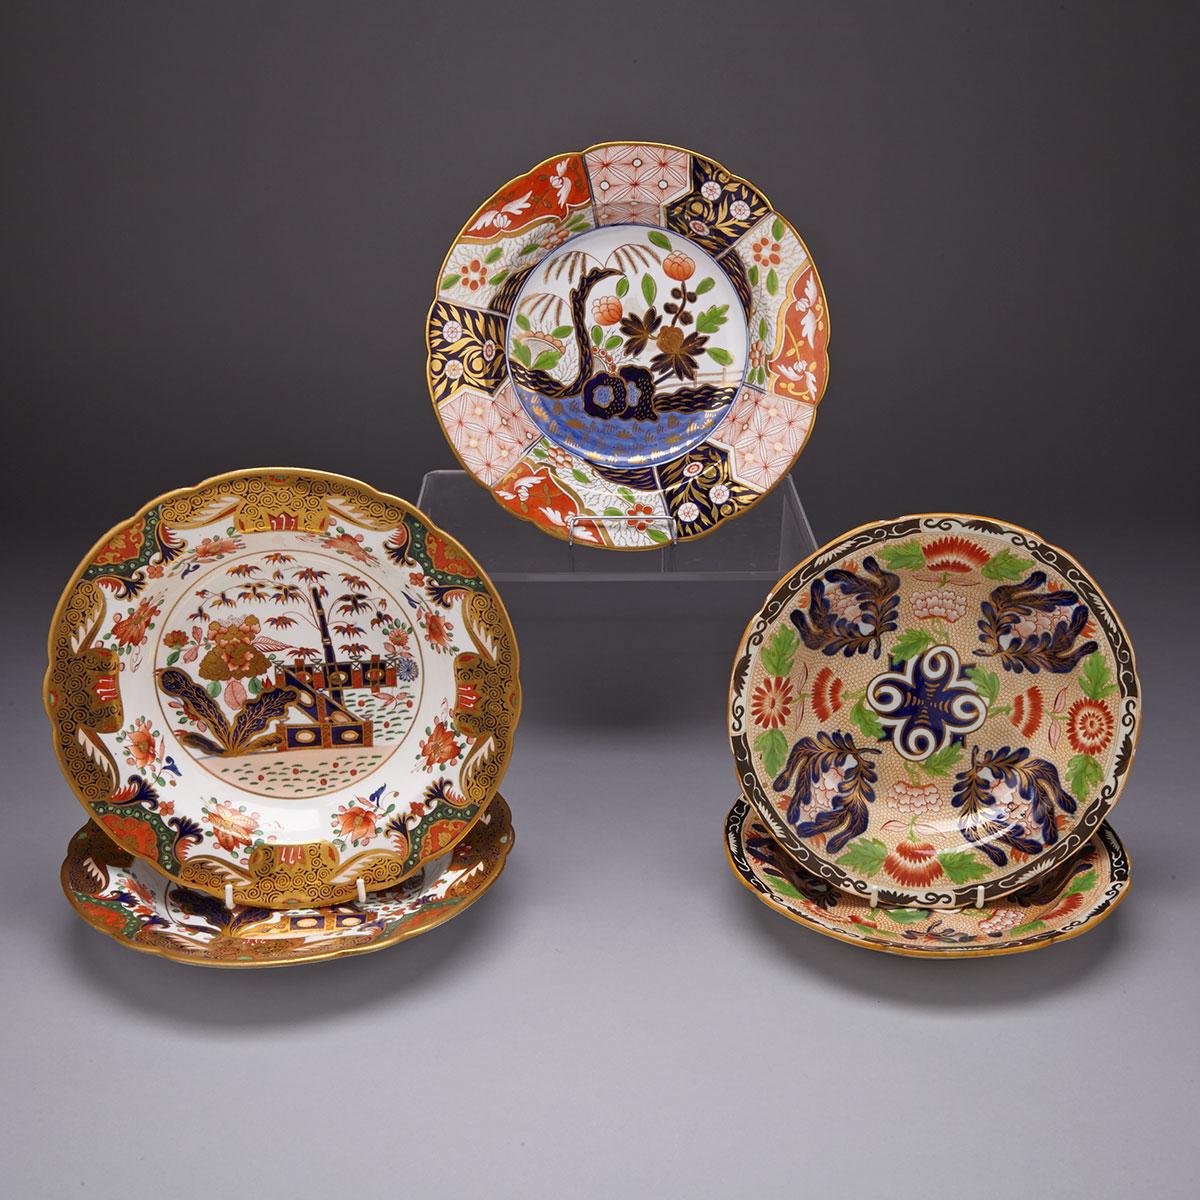 Three Spode Japan Pattern Soup Plates and a Pair of Pearlware Plates, early 19th century